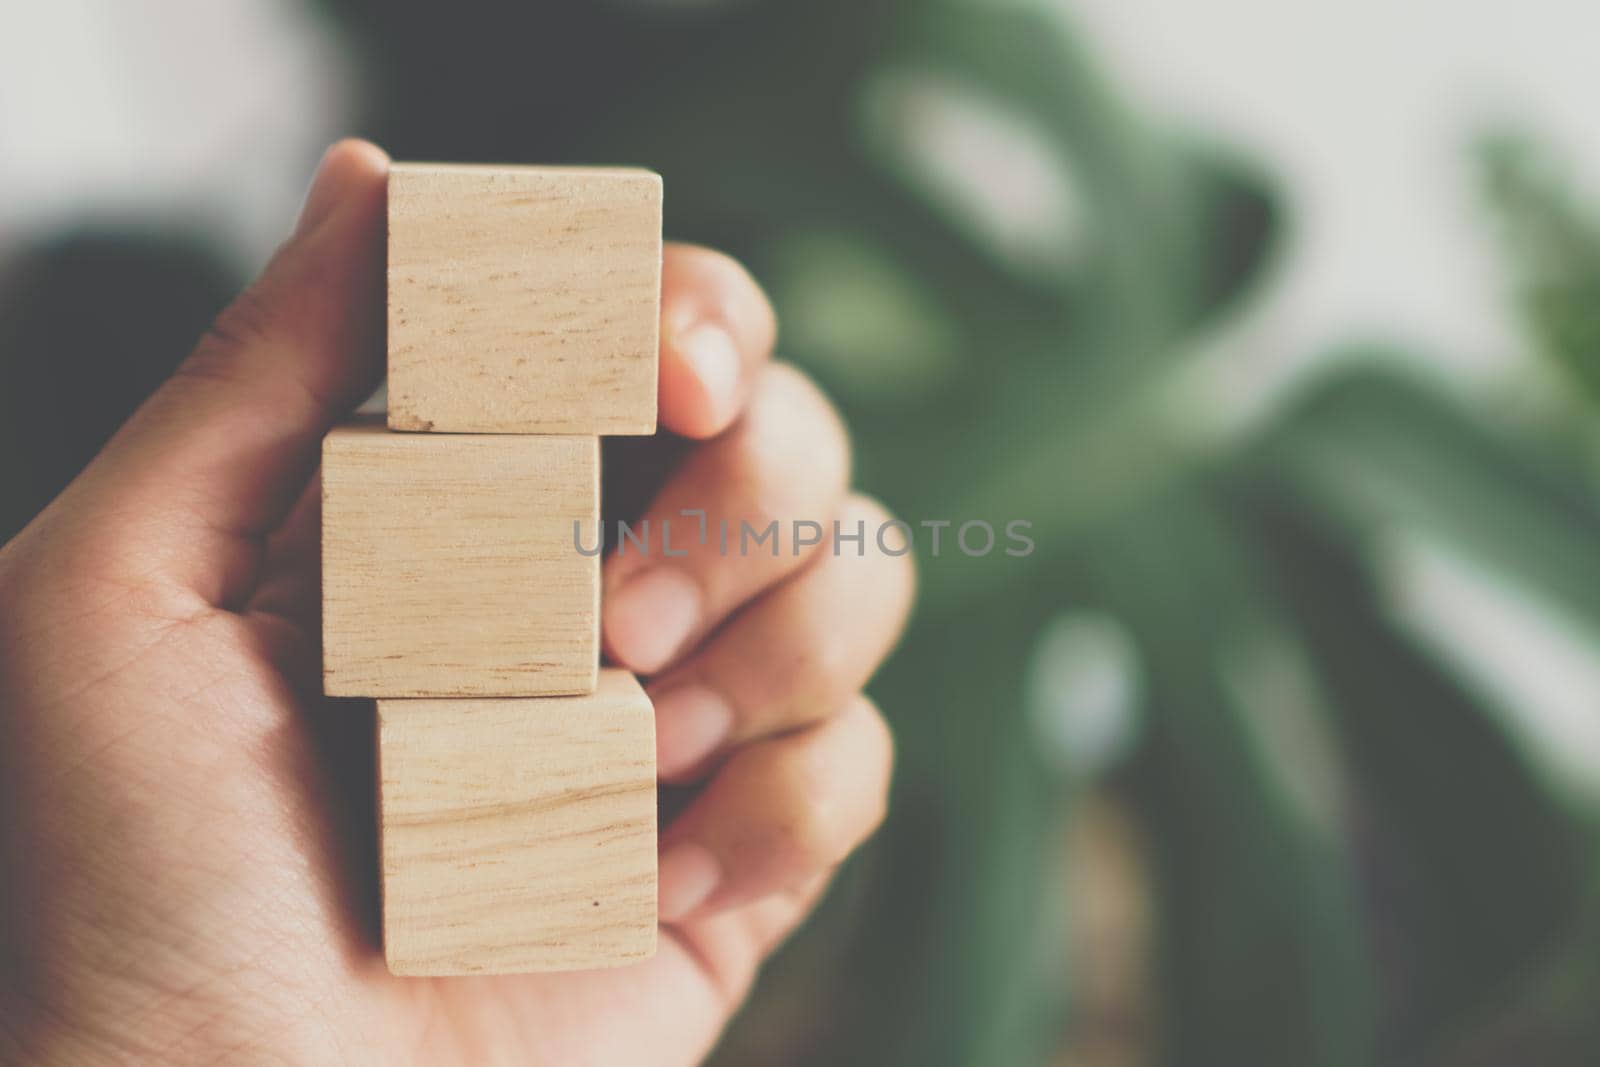 Blank wooden cube that you can put text or icon on in hand hold background